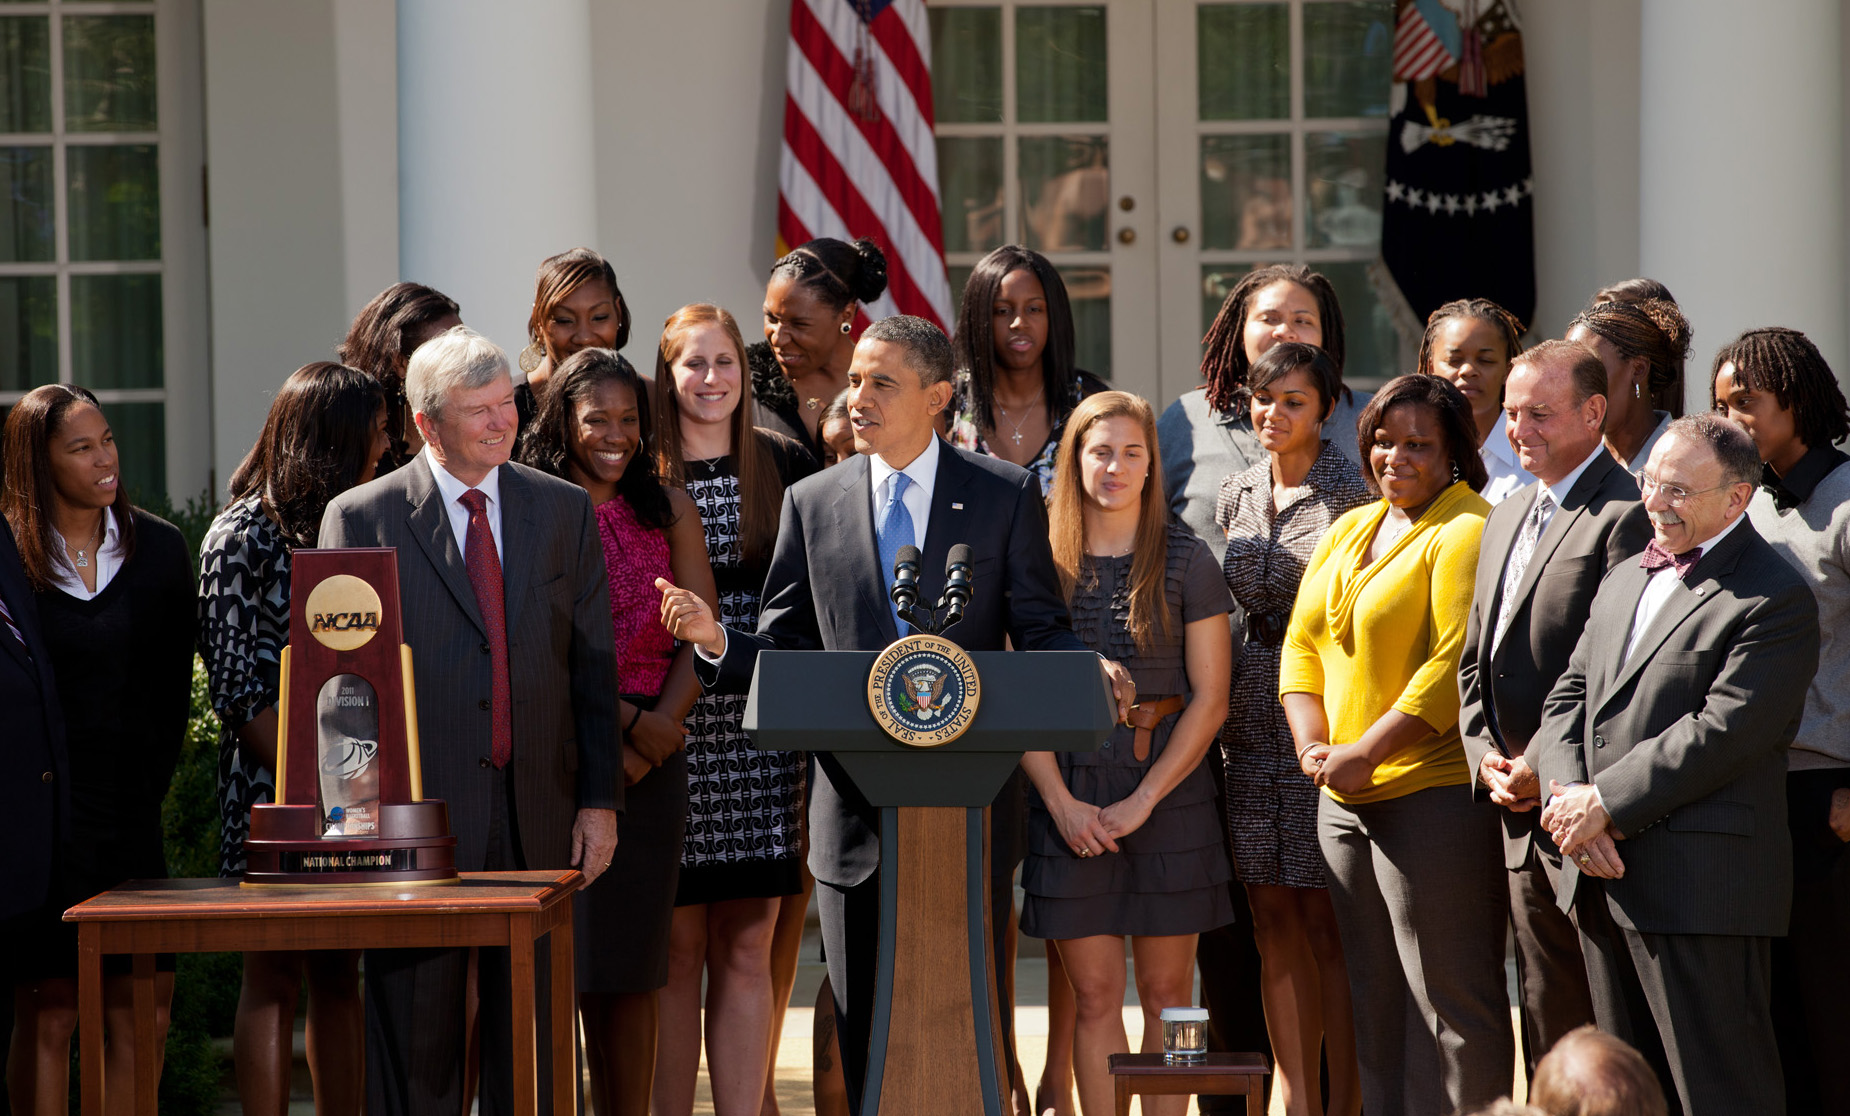 President Obama welcomes the Texas A&M University Women’s Basketball Team